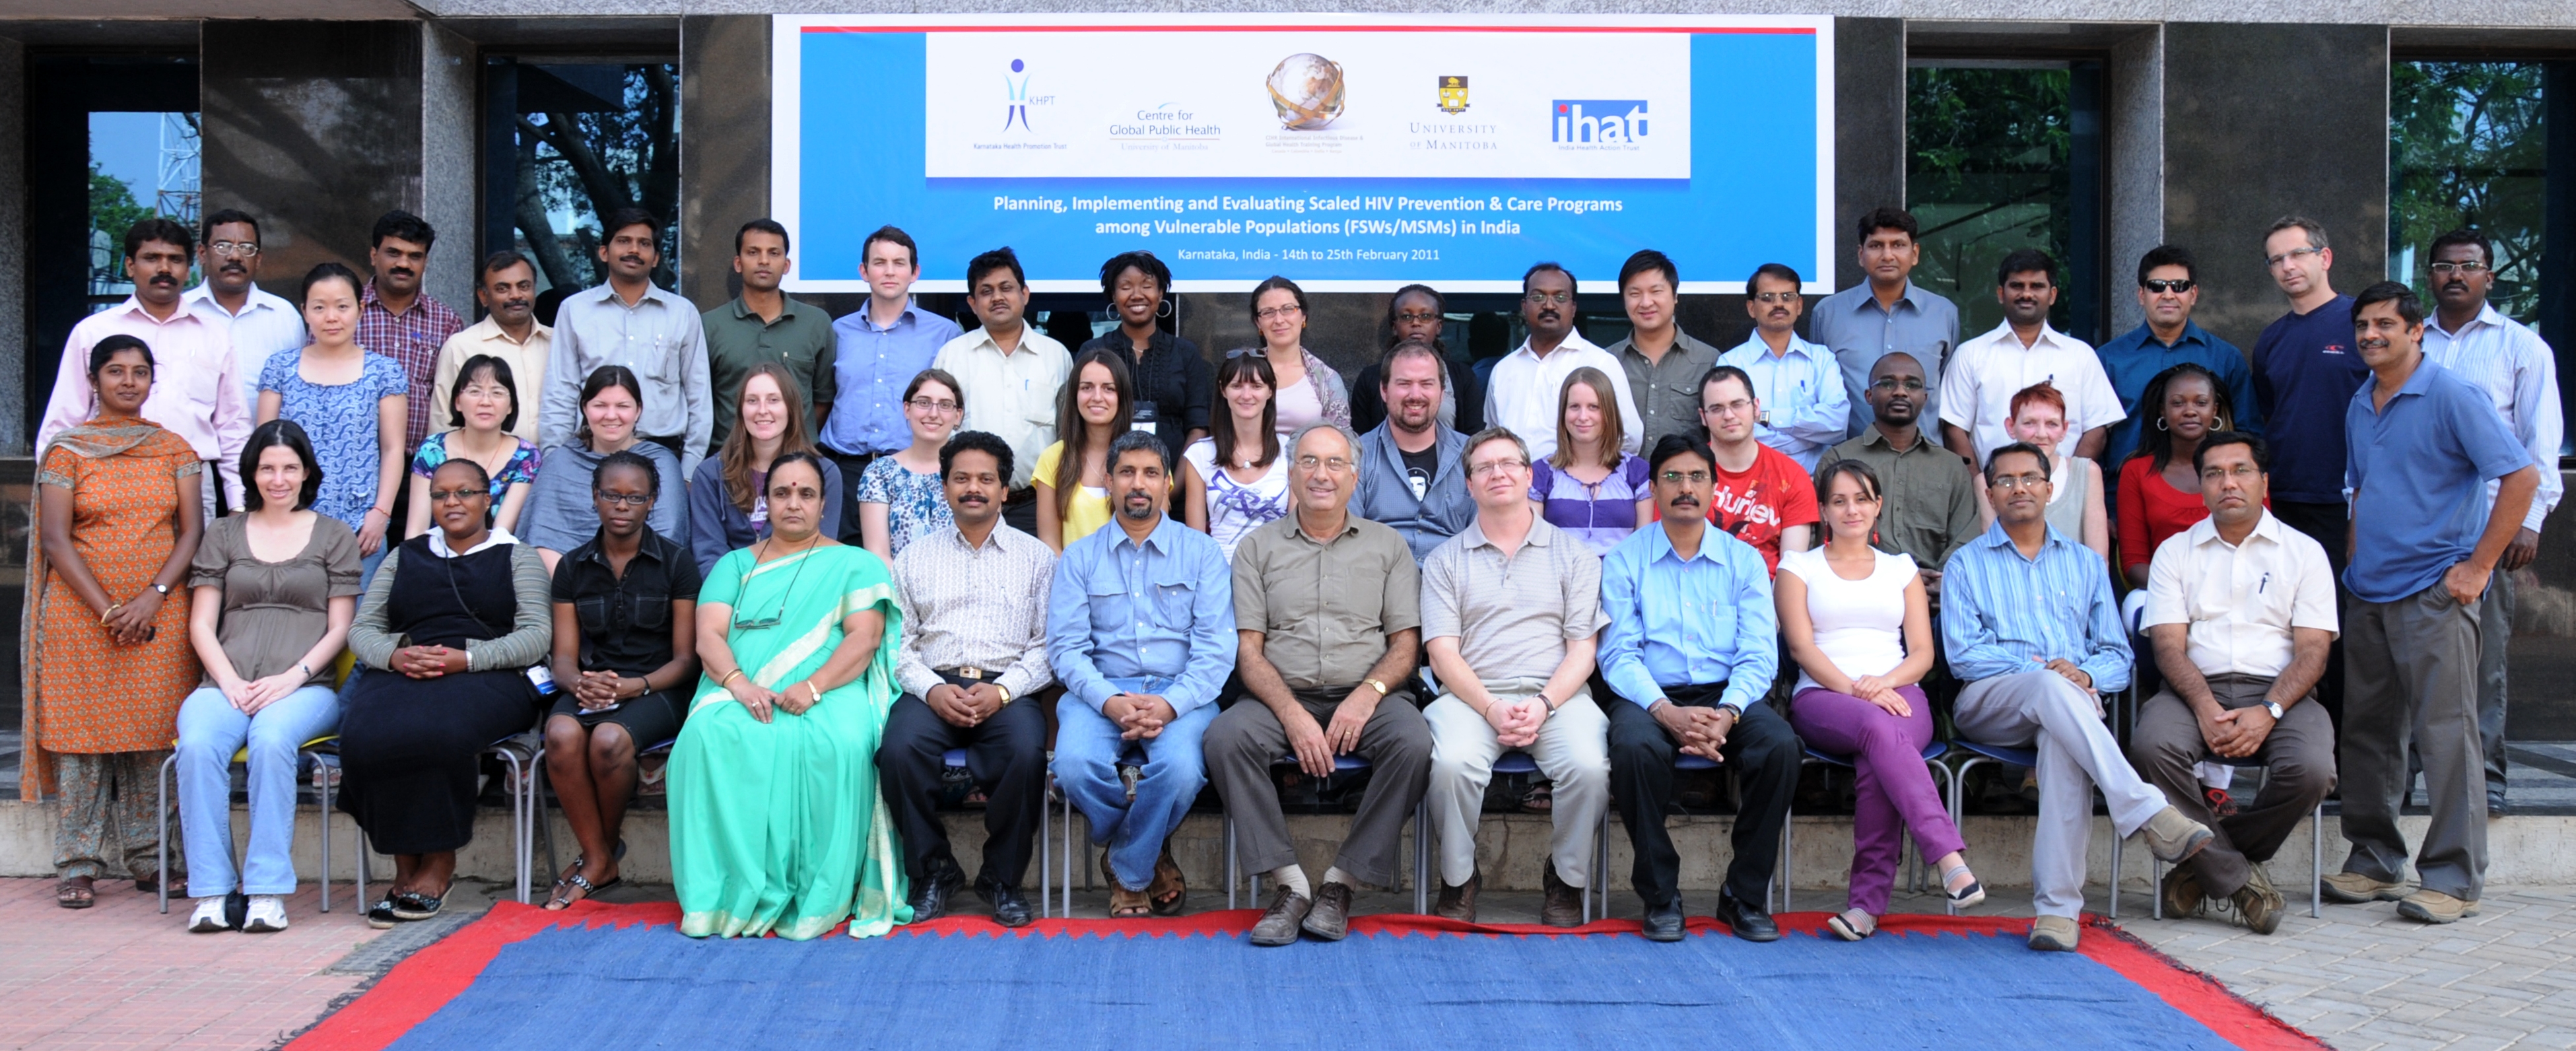 A group picture of all those attending the major course offering in Bangalore, India in February 2011.